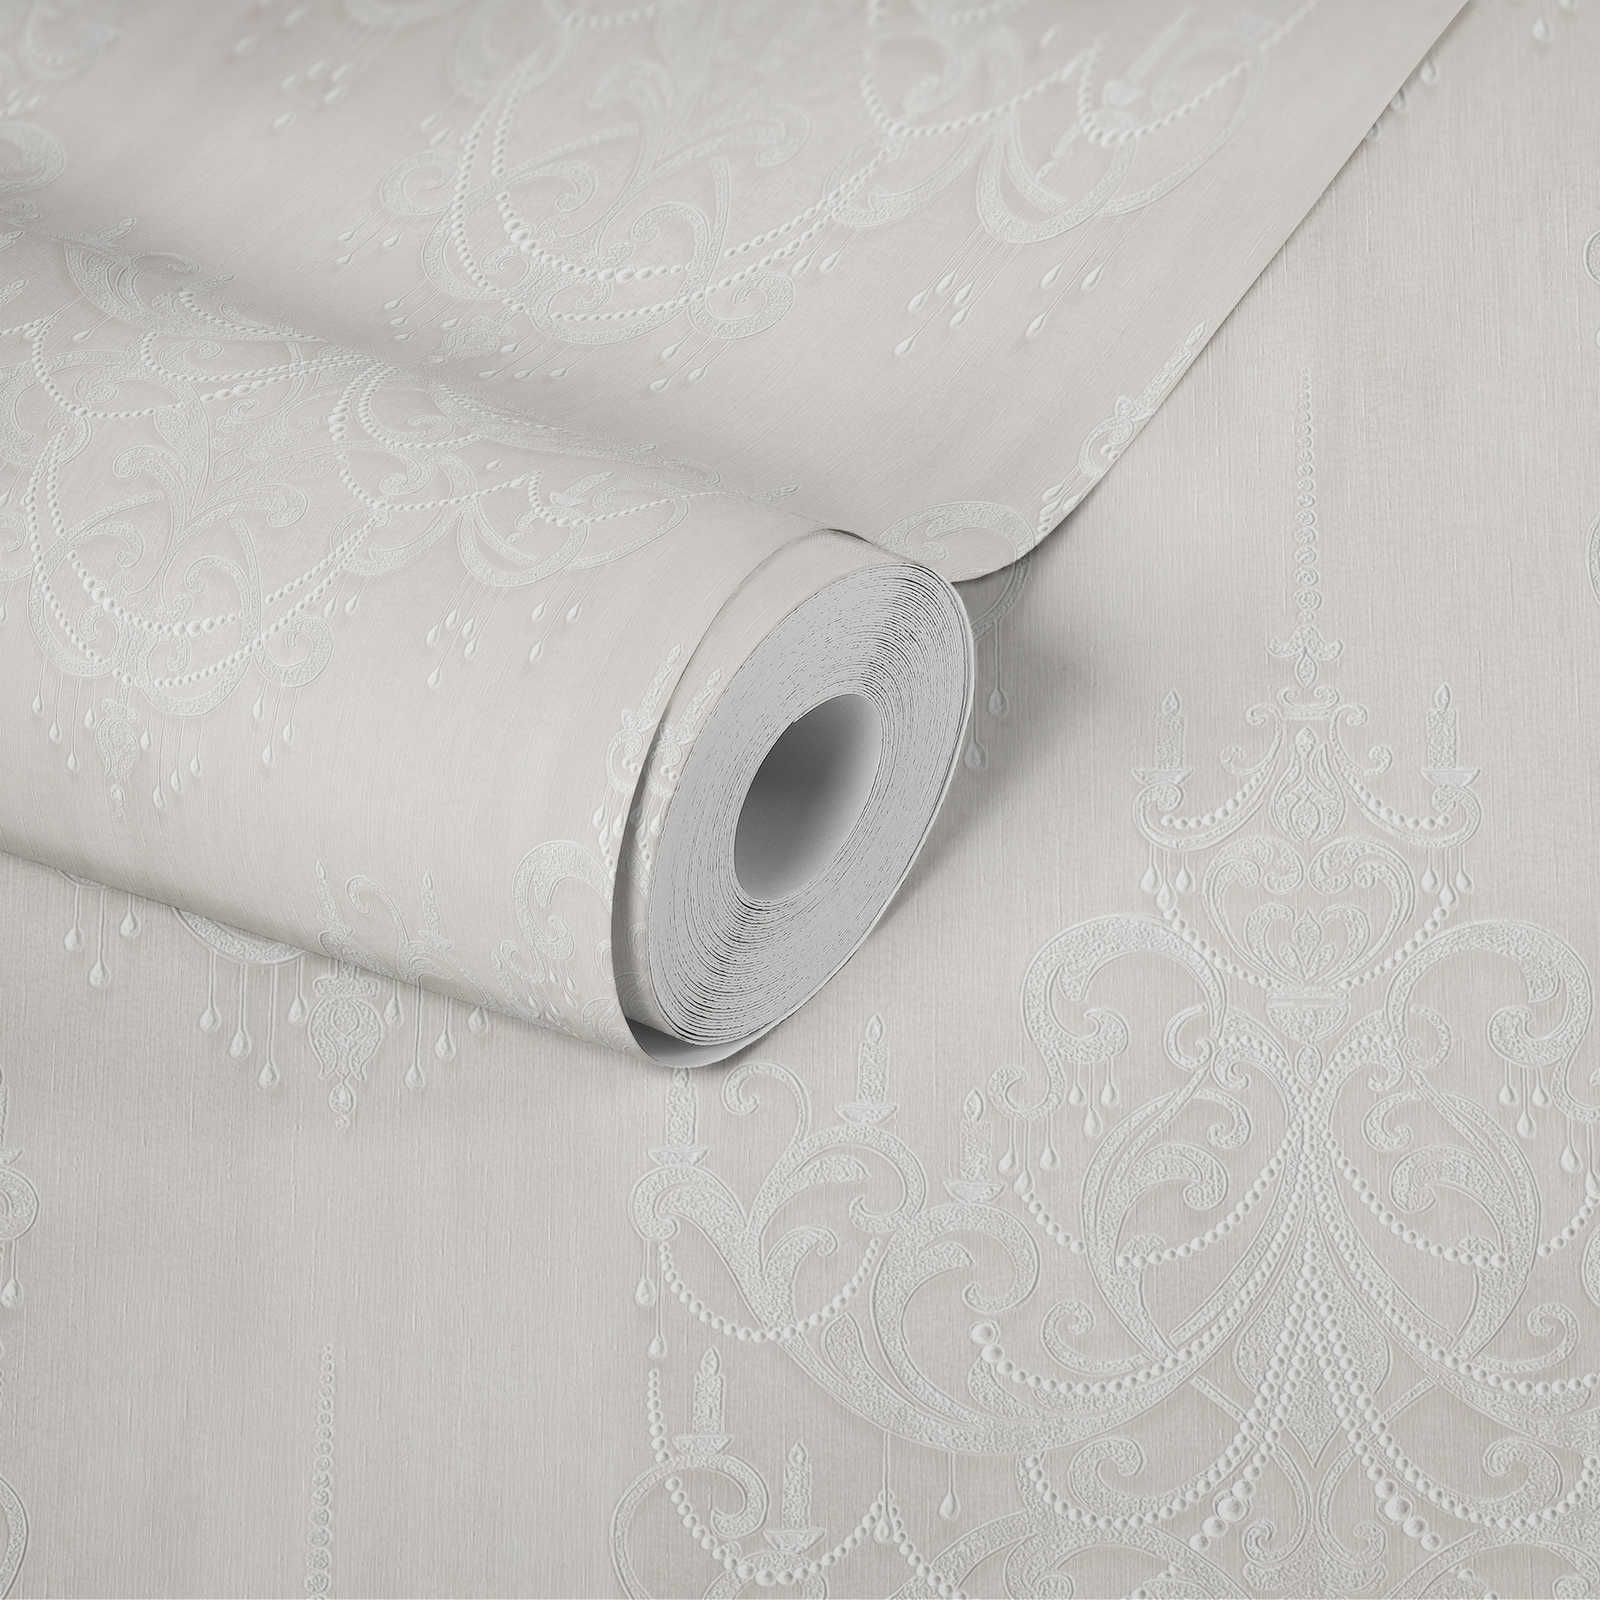             Ornament wallpaper champagne with pearl pattern - cream
        